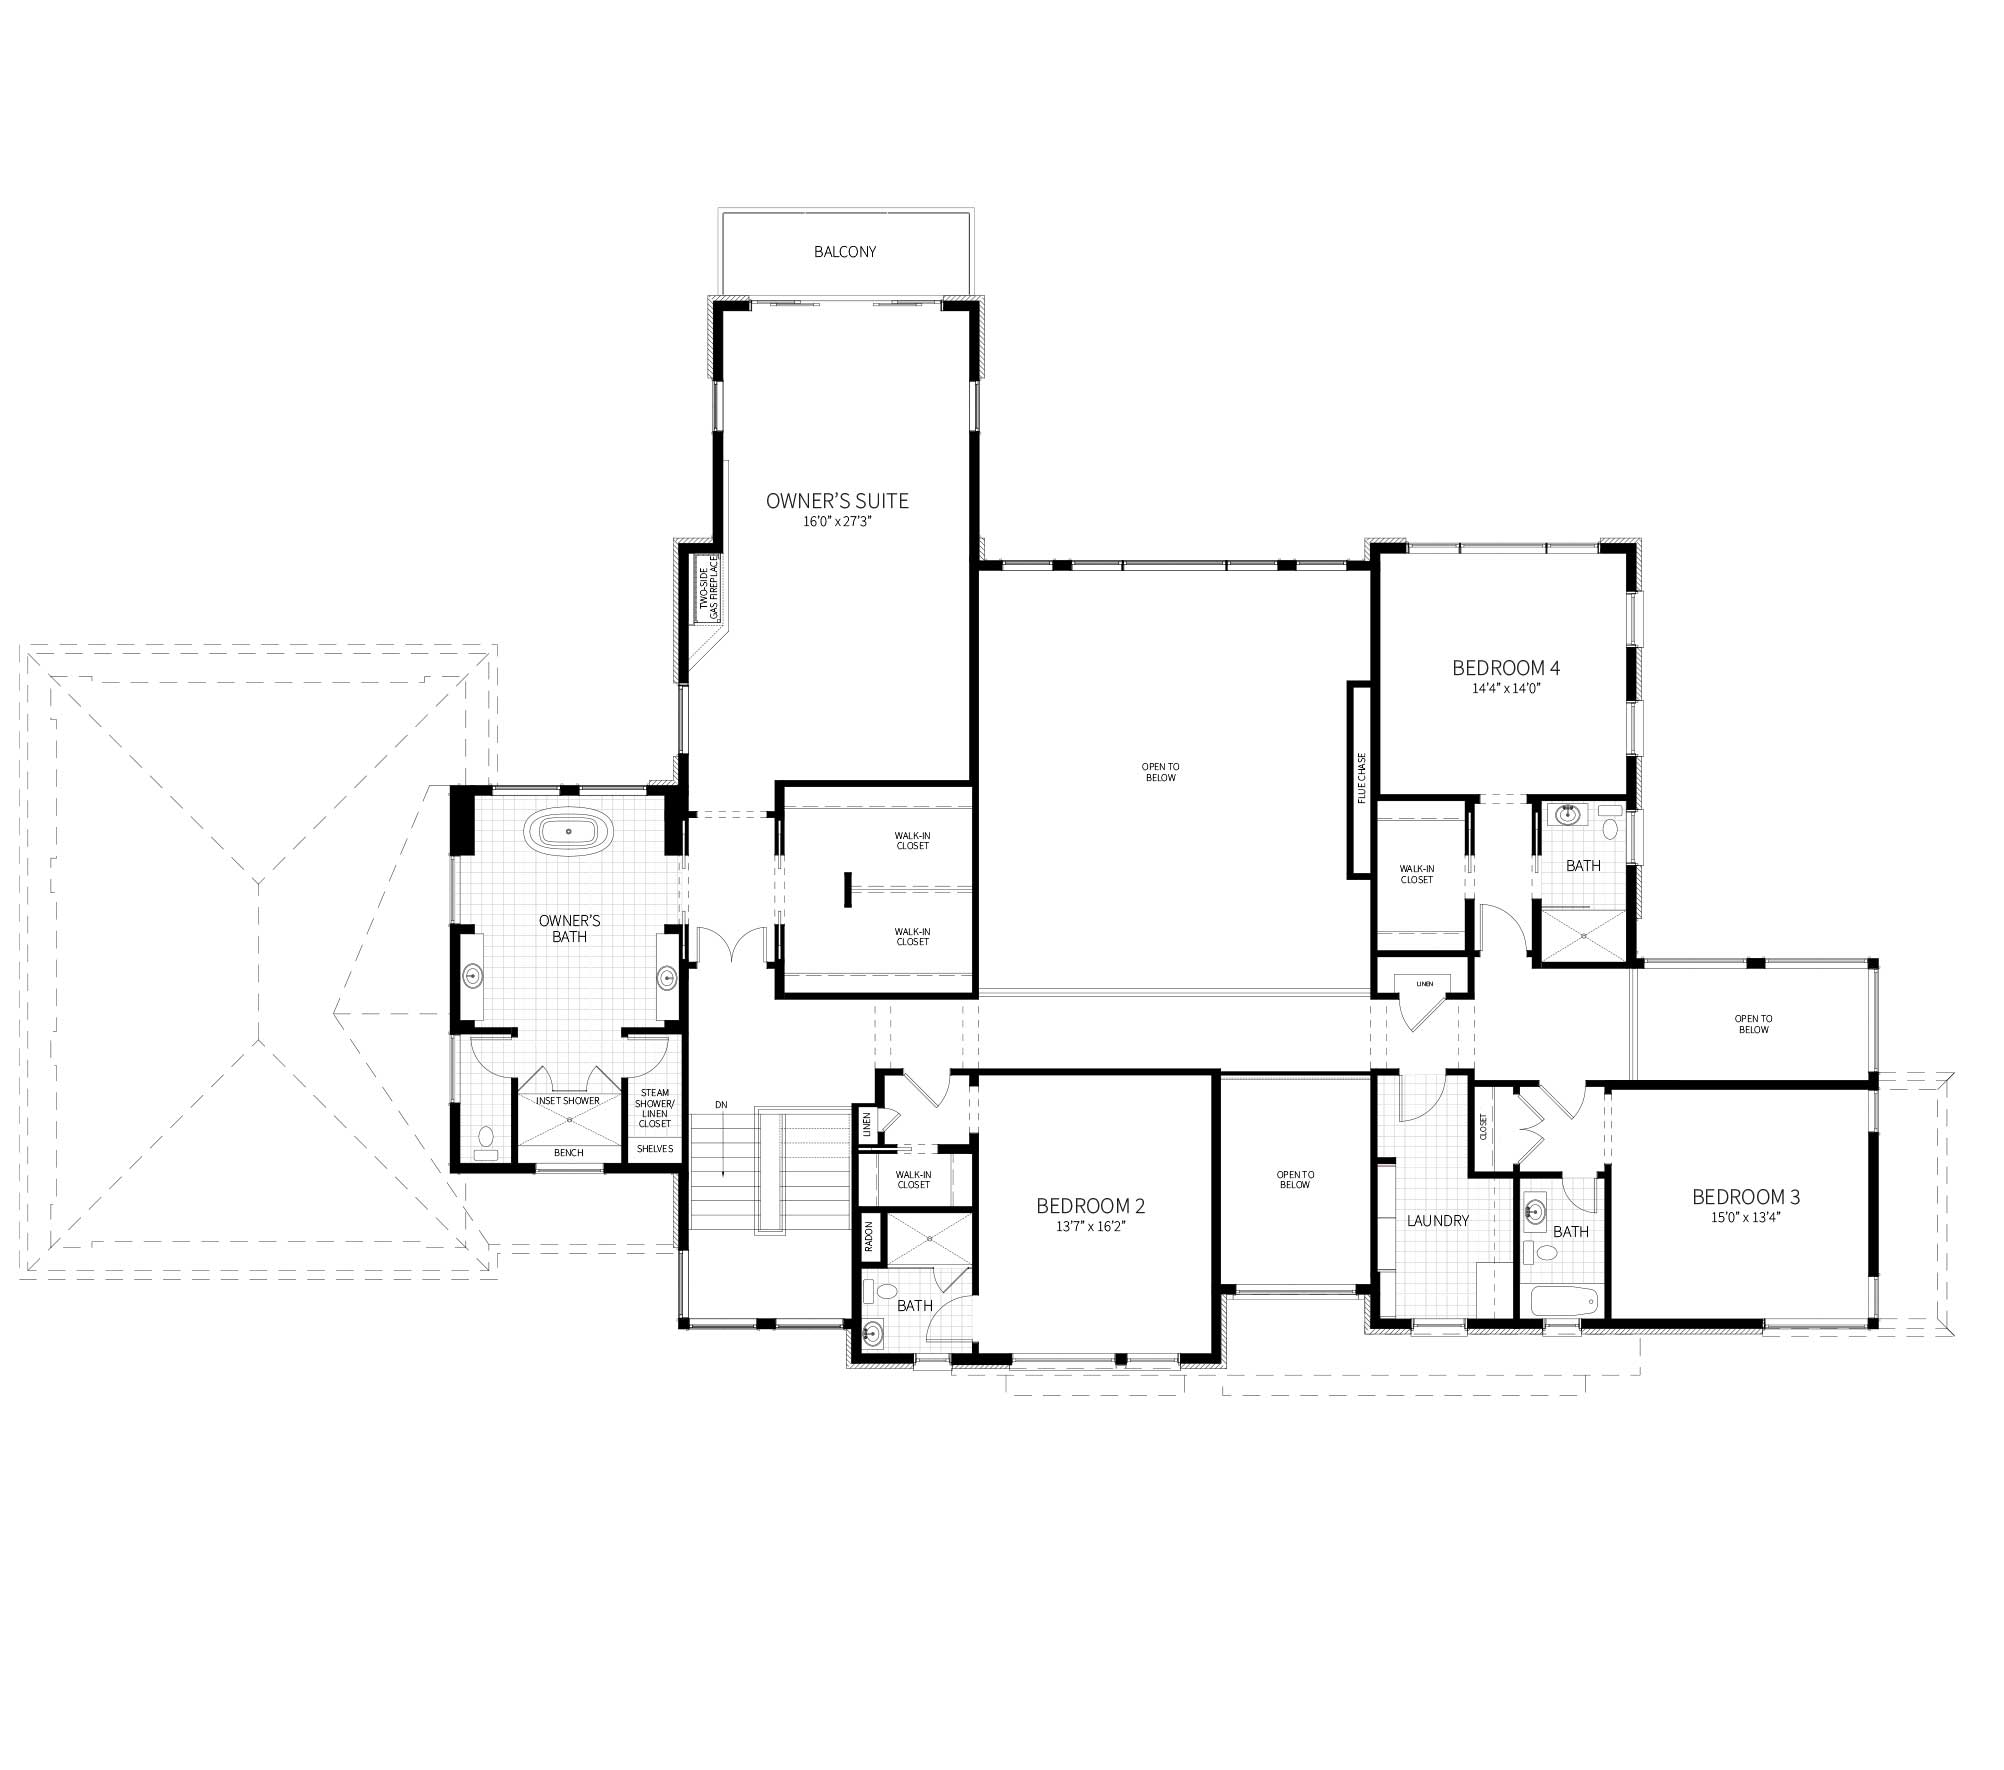 Second floor plan of the Contemporary Industrial showcase plan, with expansive owners suite and 3 additional bedrooms